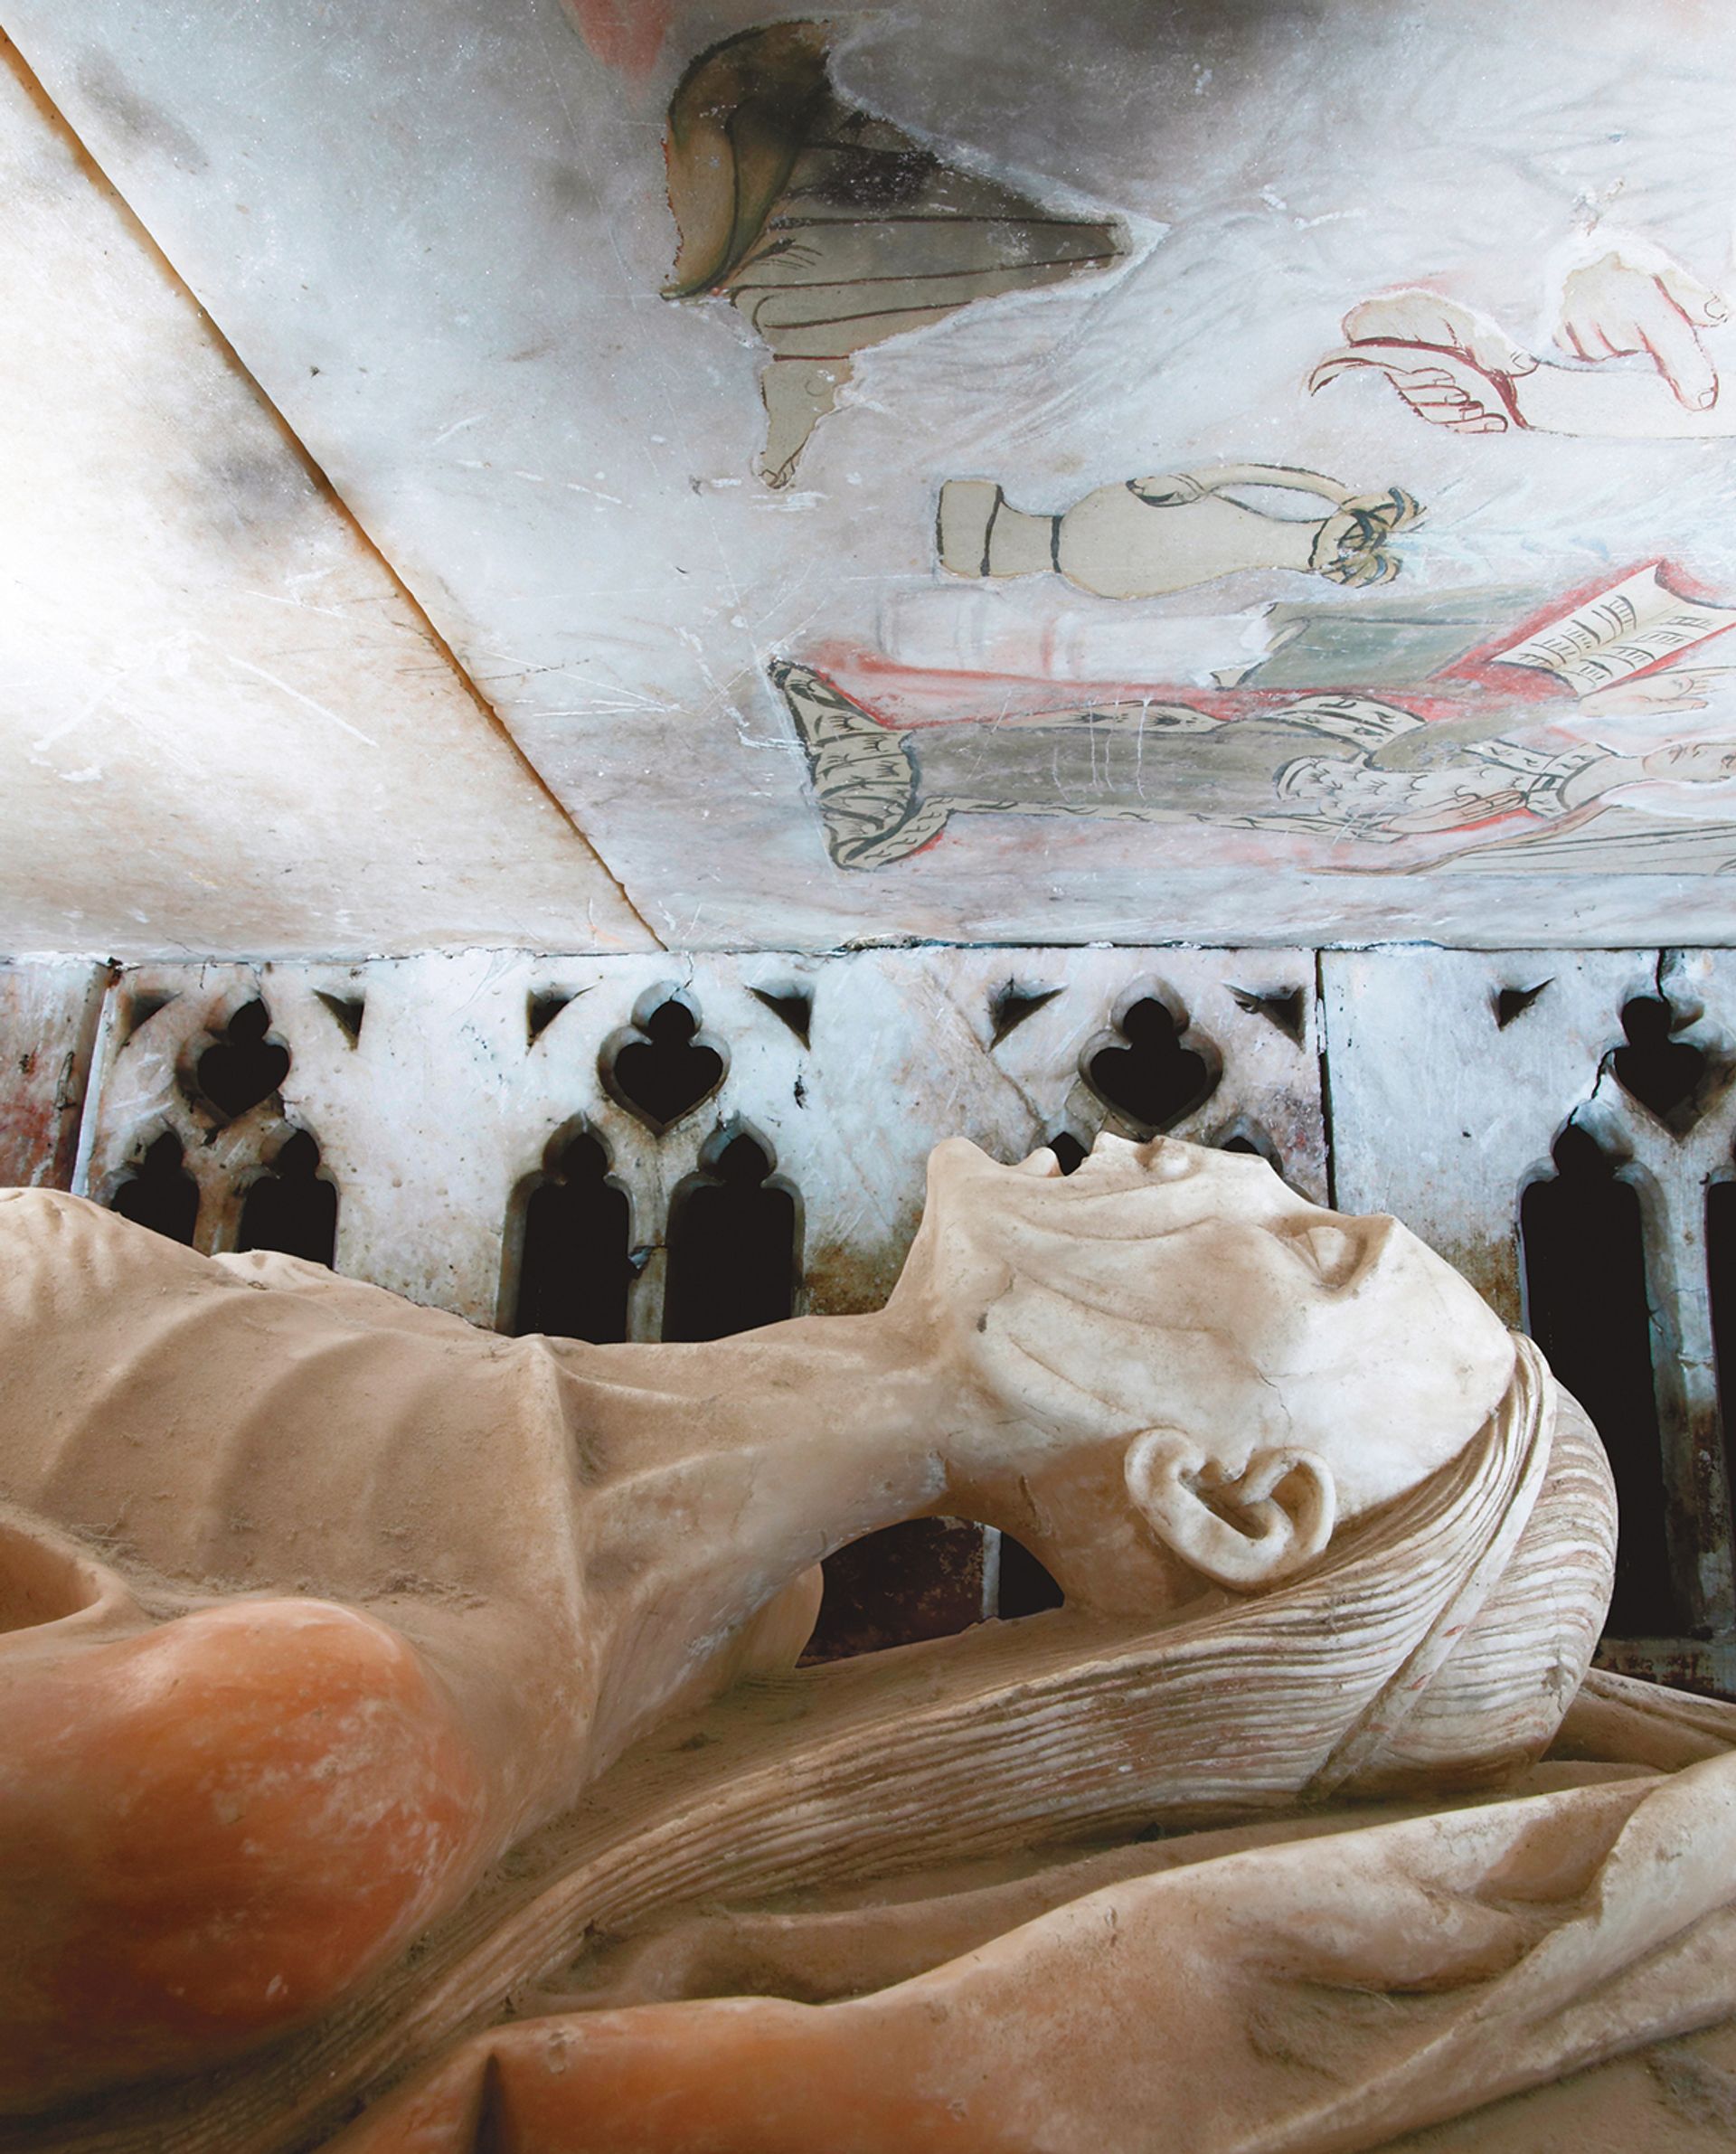 Newham’s photo of the shrivelled nude effigy of Alice de la Pole, the Duchess of Suffolk—and Chaucer’s granddaughter—offers a rare view of a late Medieval “double-decker” tomb C.B. Newham